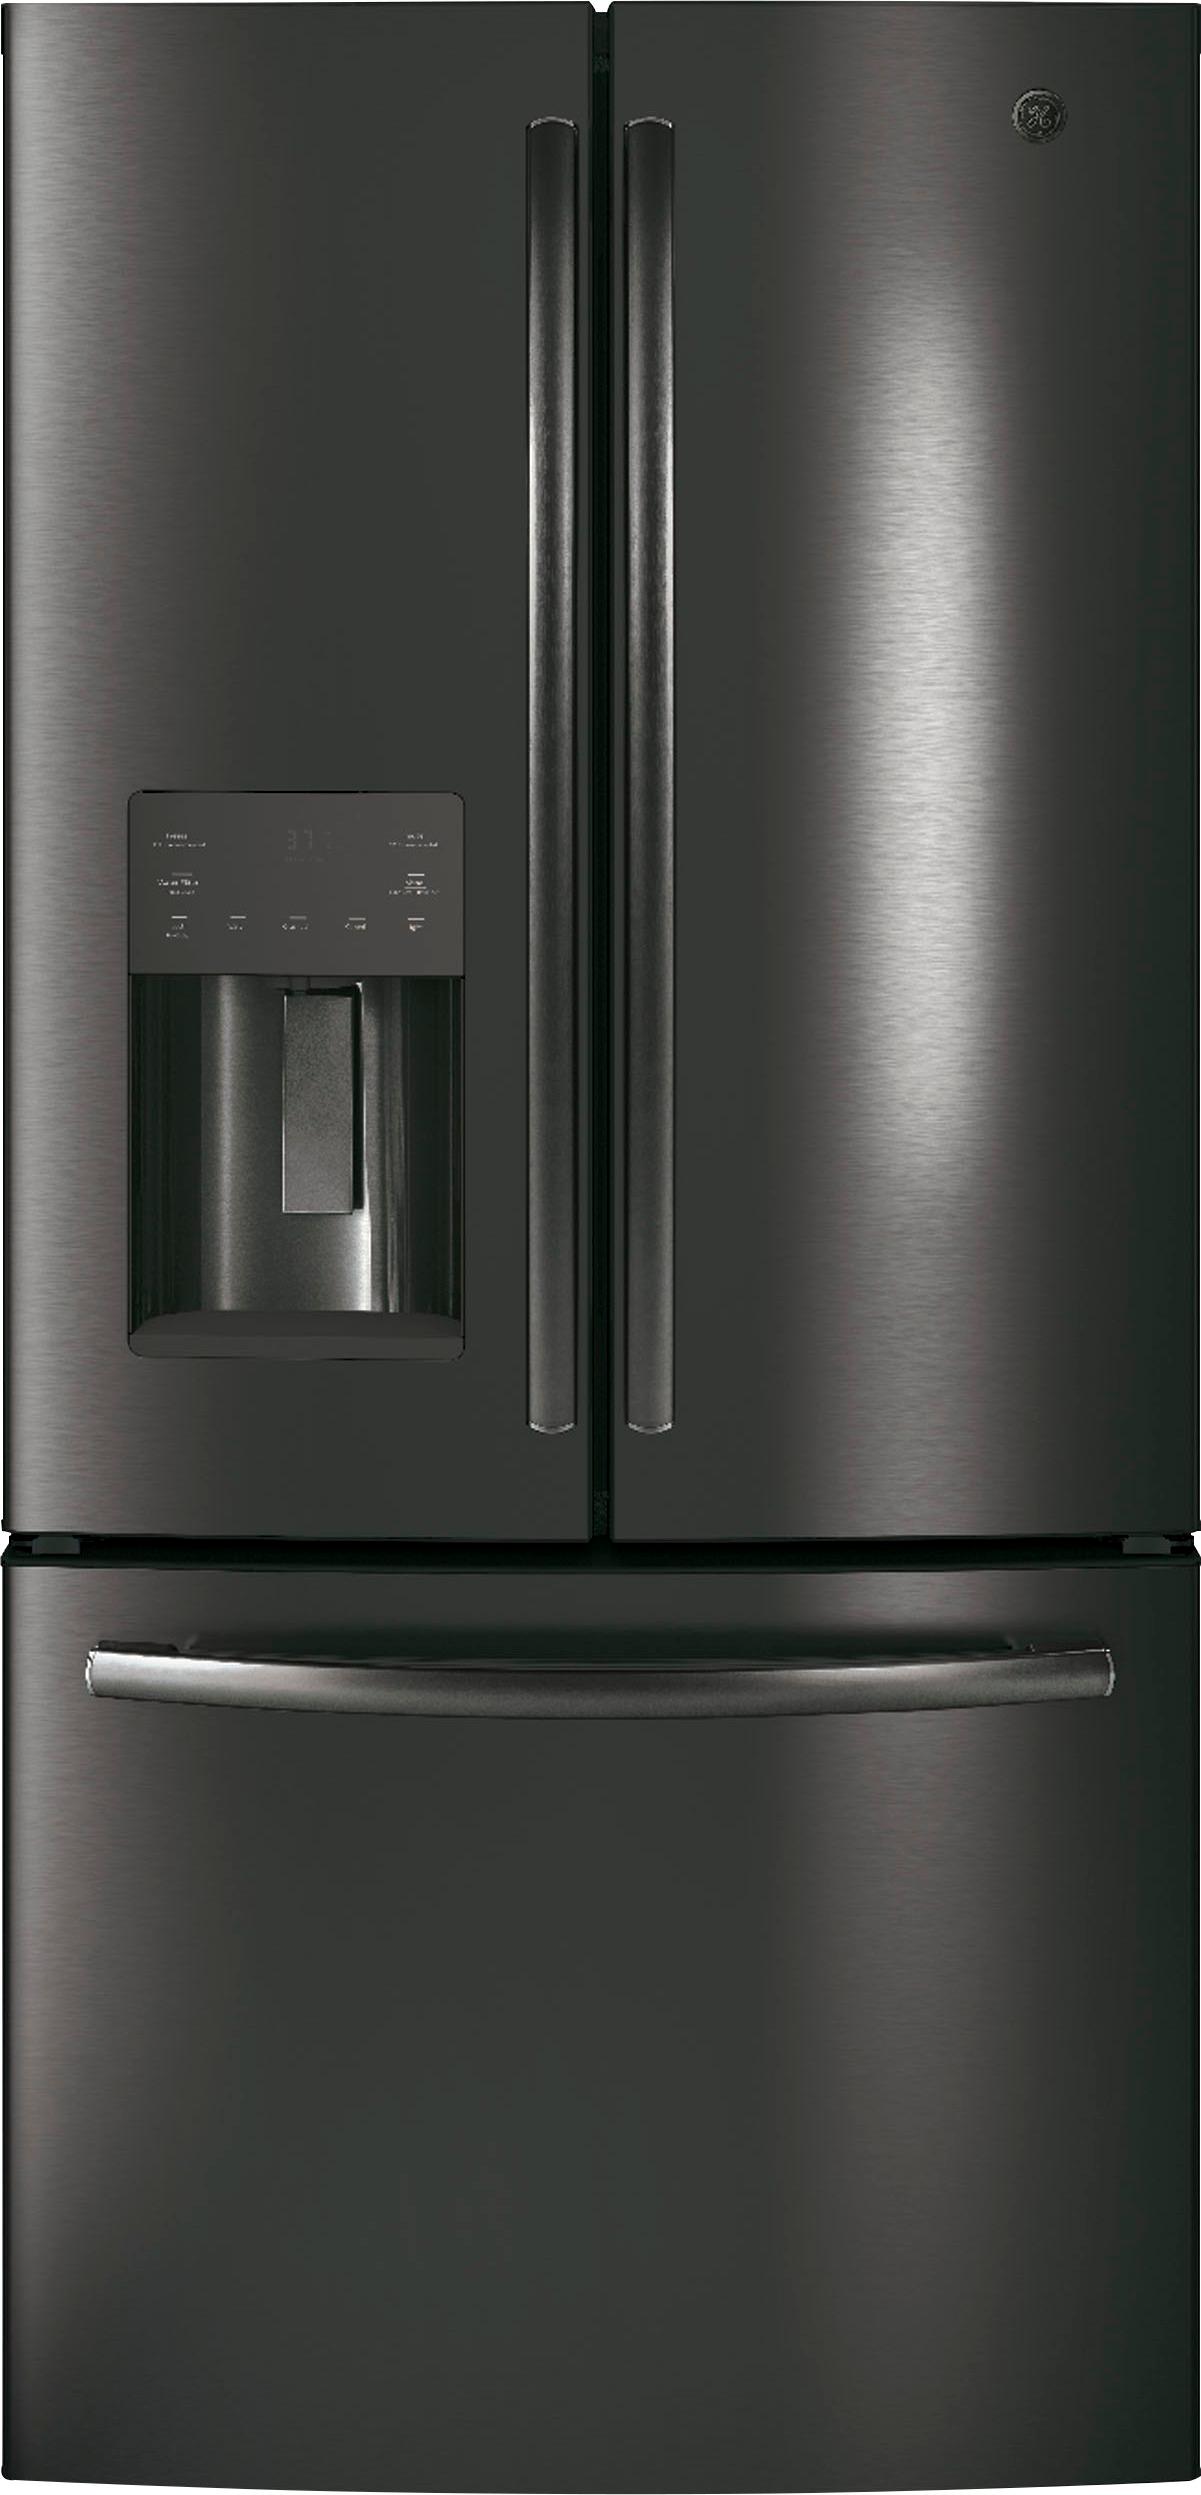 49+ Ge french door refrigerator not making ice ideas in 2021 